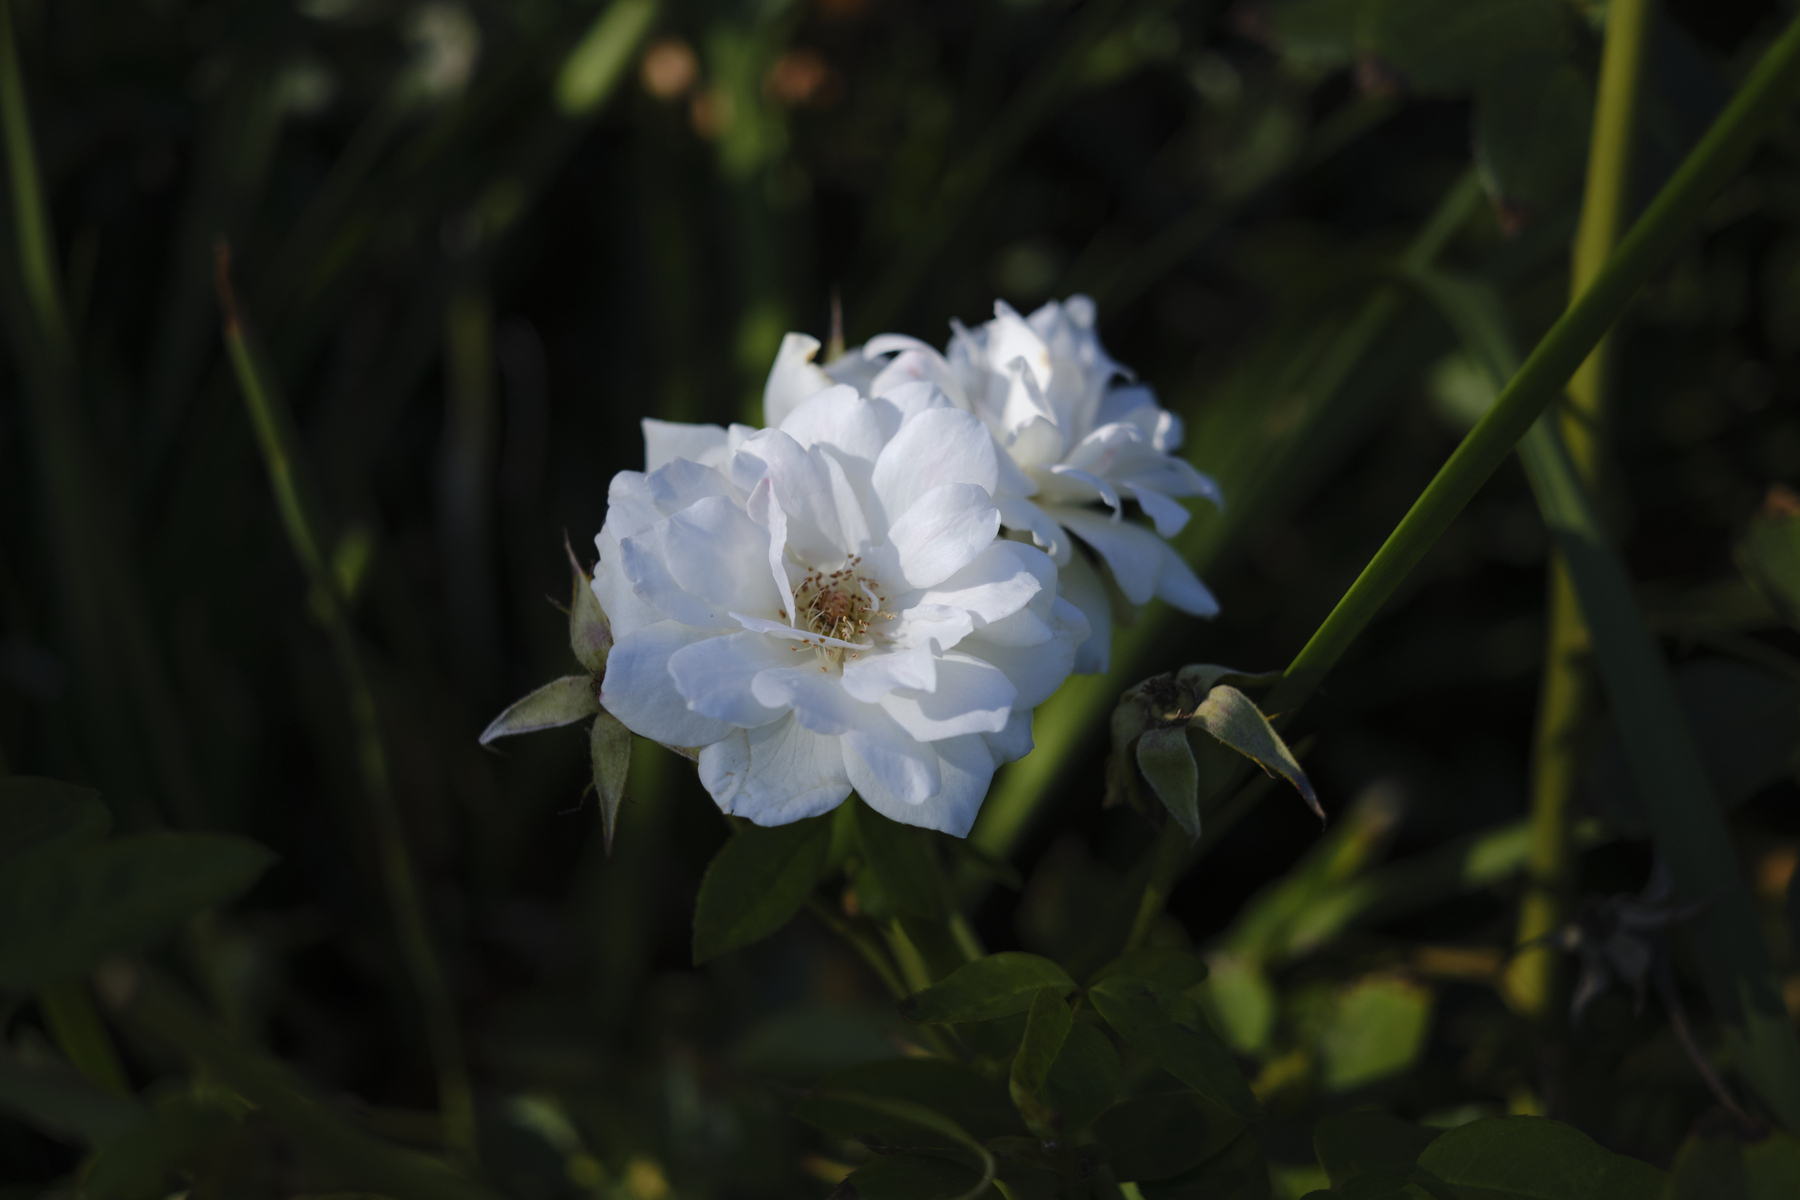 Two white roses share a single stem, lit by the late afternoon sun. One rose is featured more prominently than the other. The roses are in center frame, and the rest of the image is darker, in shadow. 